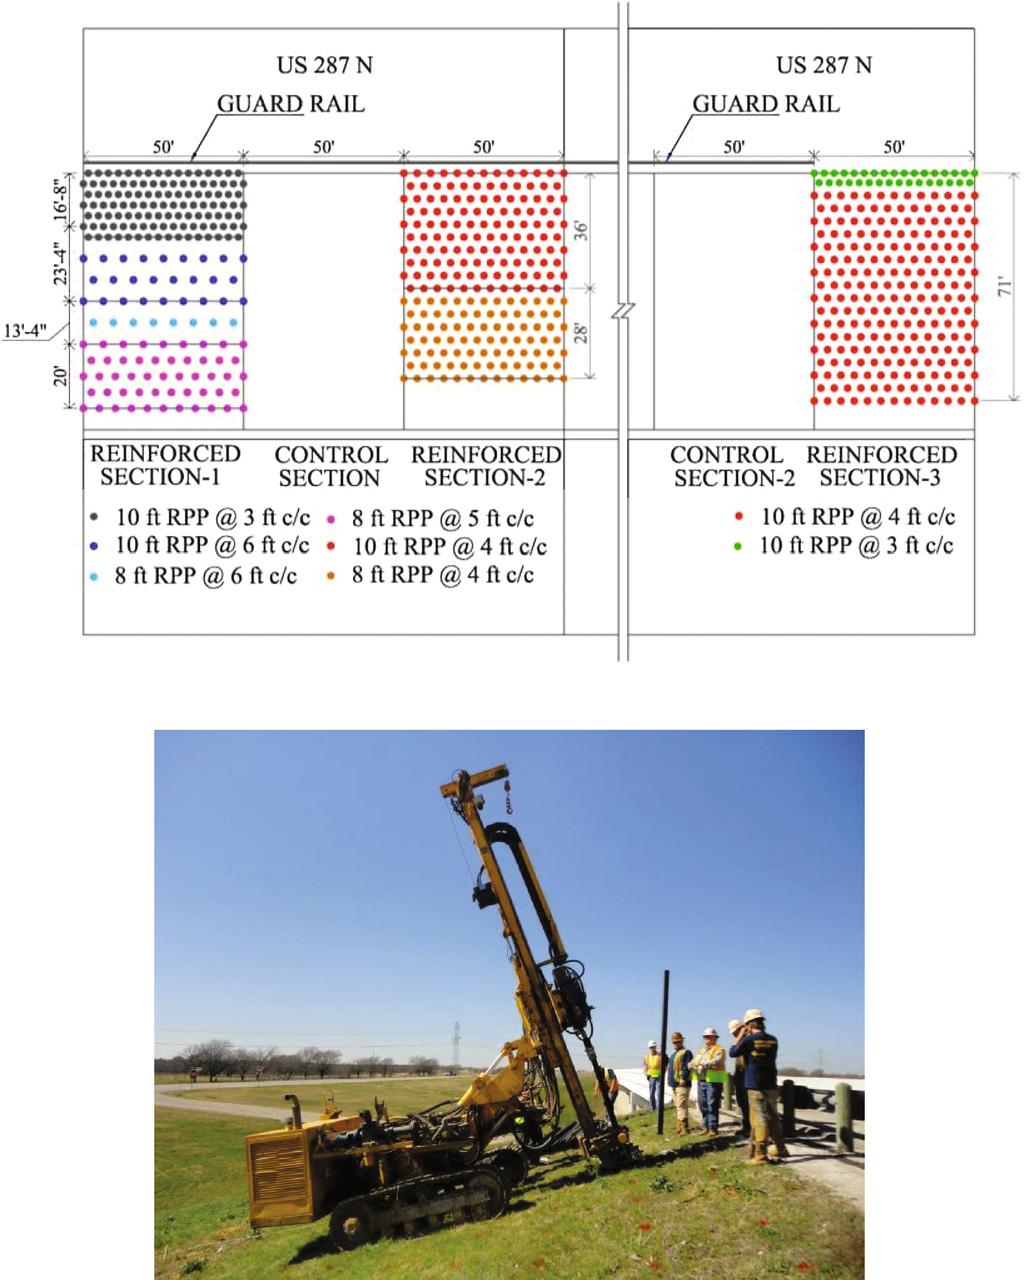 140 M.S. Khan et al. (a) (b) Fig. 3. (a) Layout of RPP at US 287 slope (b) Installation photo 2011, as presented in Fig. 3(b). Reinforced Section 3 was stabilized during March, 2012.